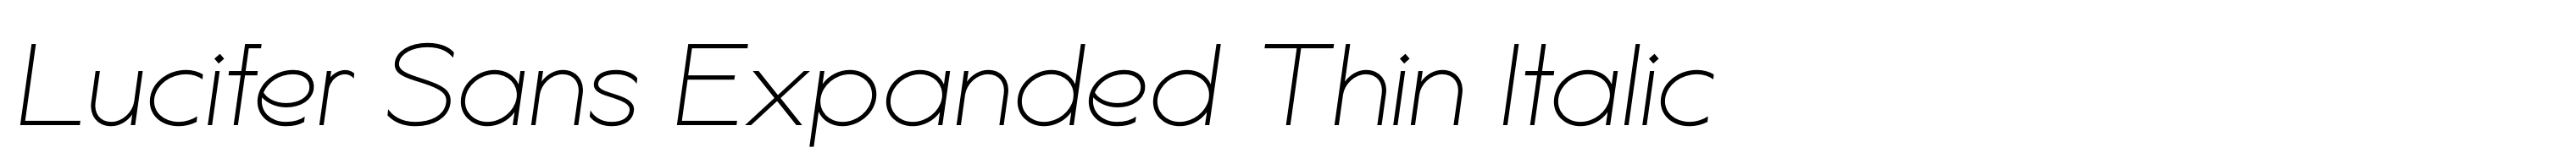 Lucifer Sans Expanded Thin Italic